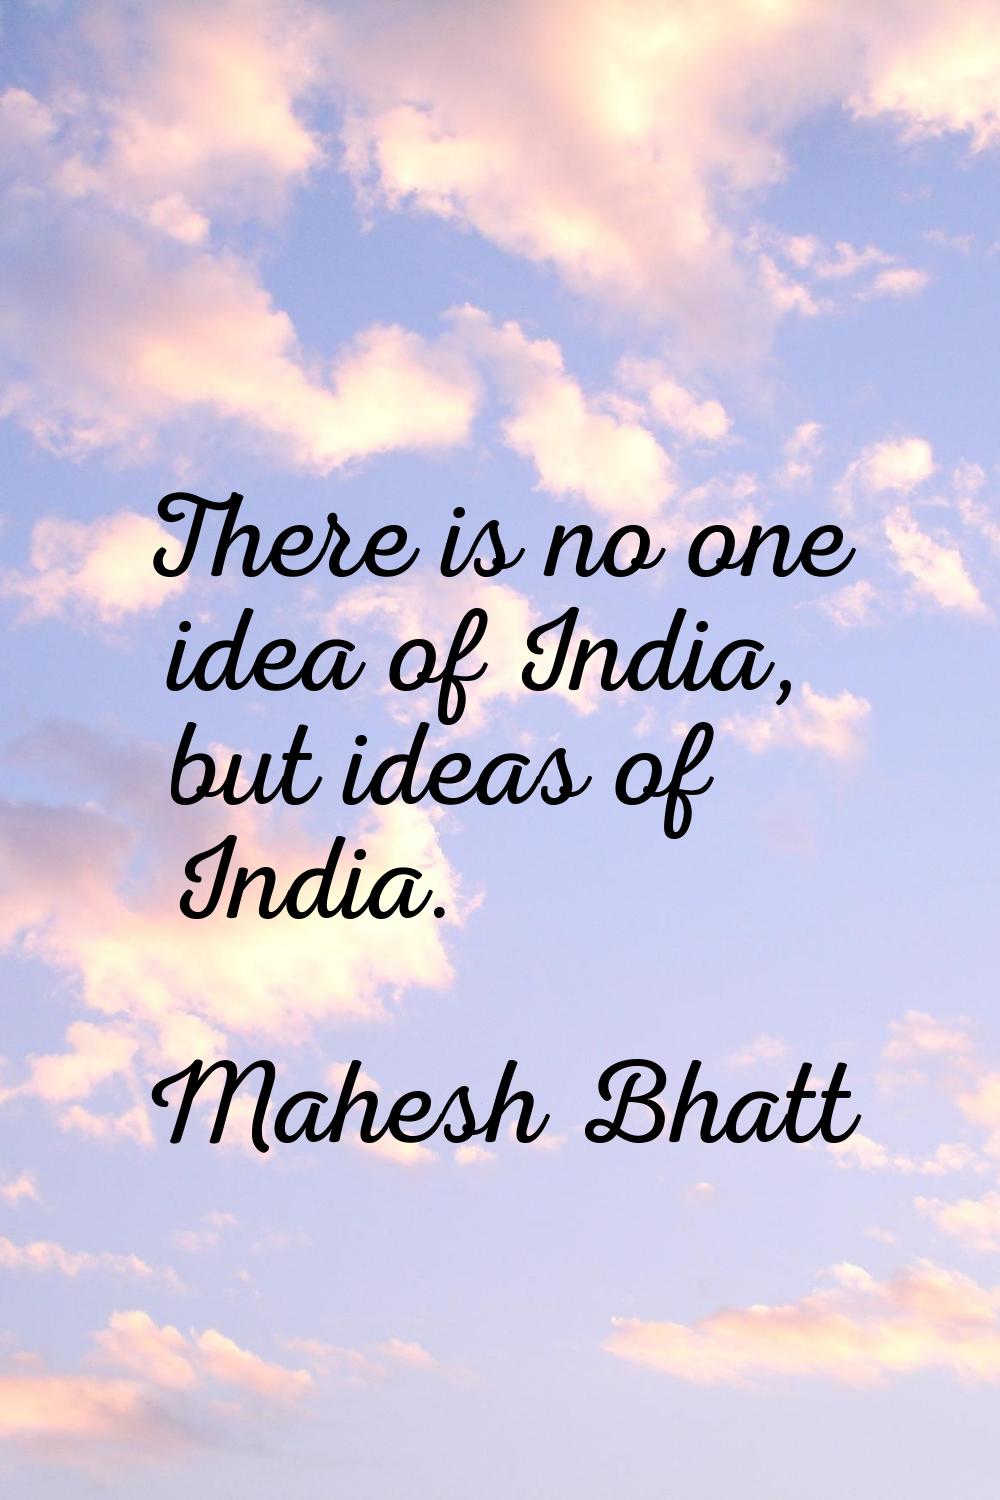 There is no one idea of India, but ideas of India.